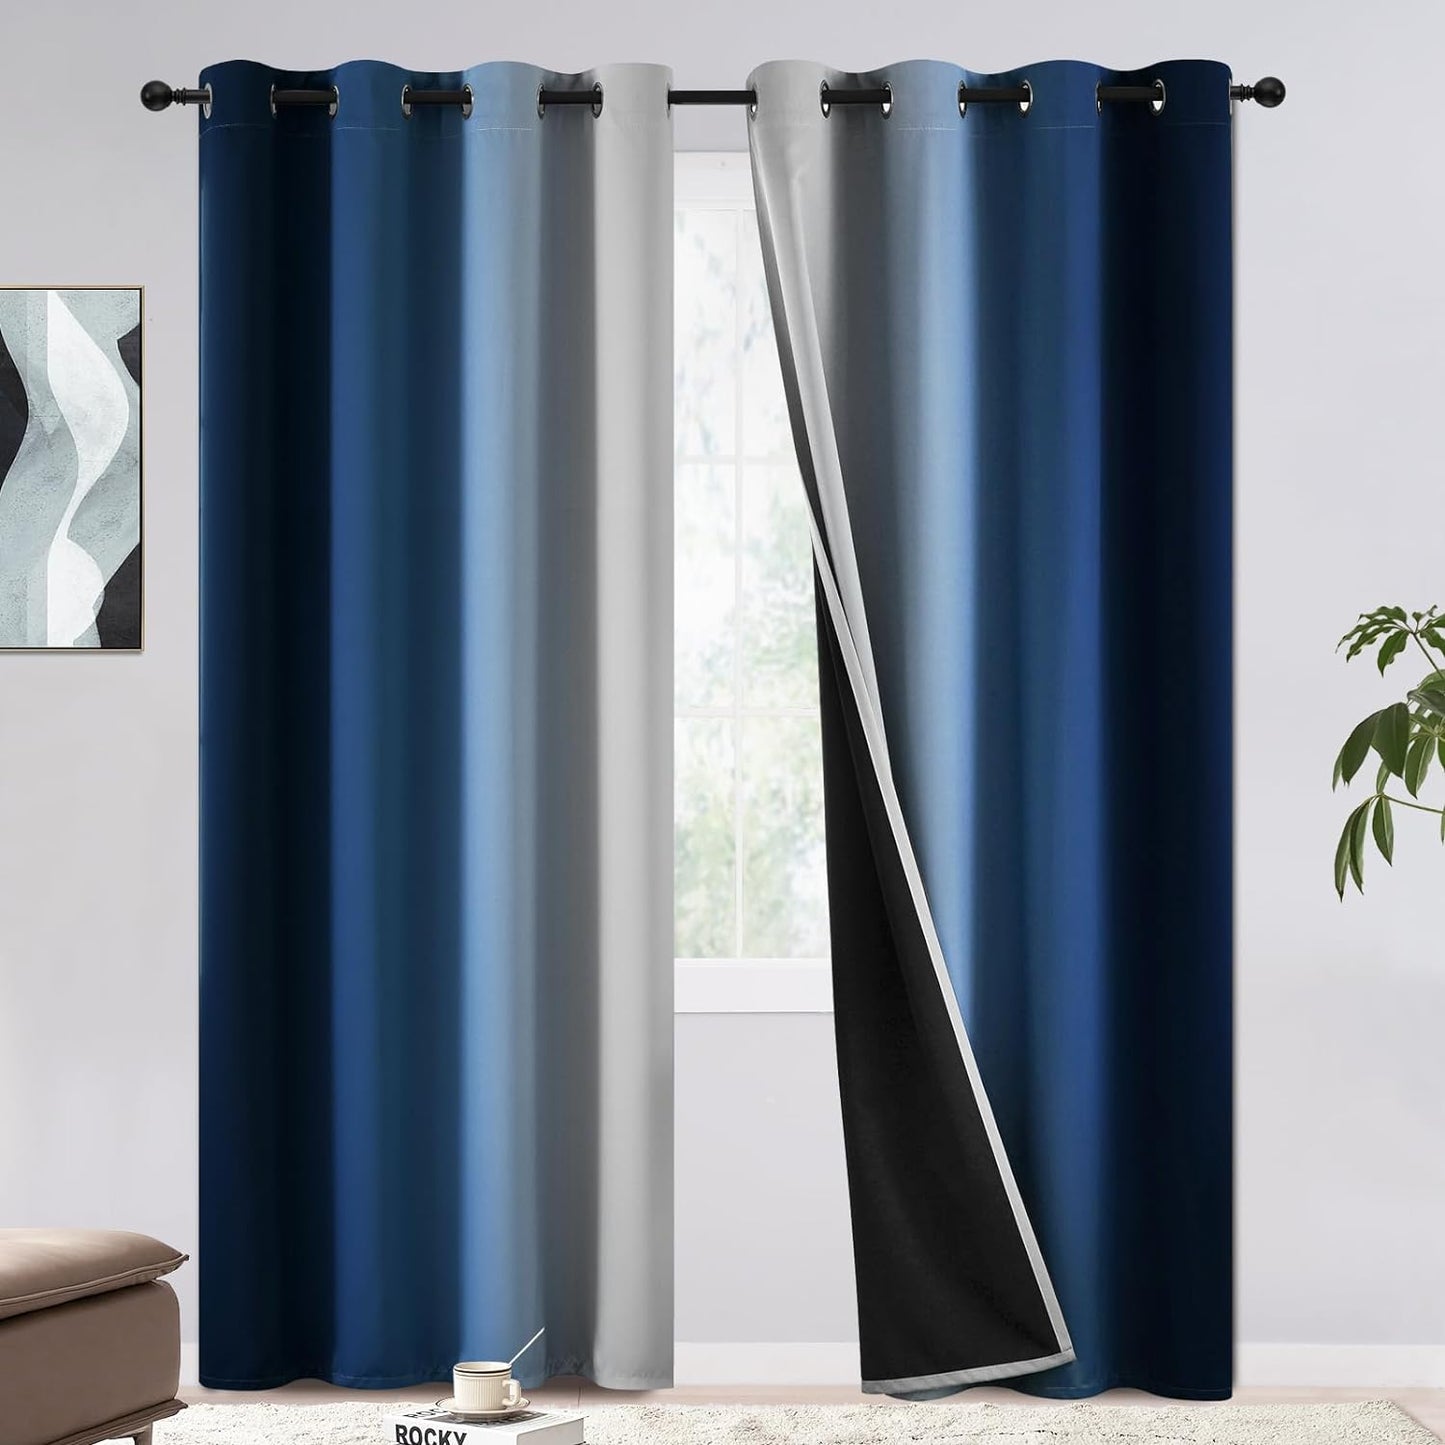 COSVIYA 100% Blackout Curtains & Drapes Ombre Purple Curtains 63 Inch Length 2 Panels,Full Room Darkening Grommet Gradient Insulated Thermal Window Curtains for Bedroom/Living Room,52X63 Inches  COSVIYA Blue To Greyish White 52W X 84L 